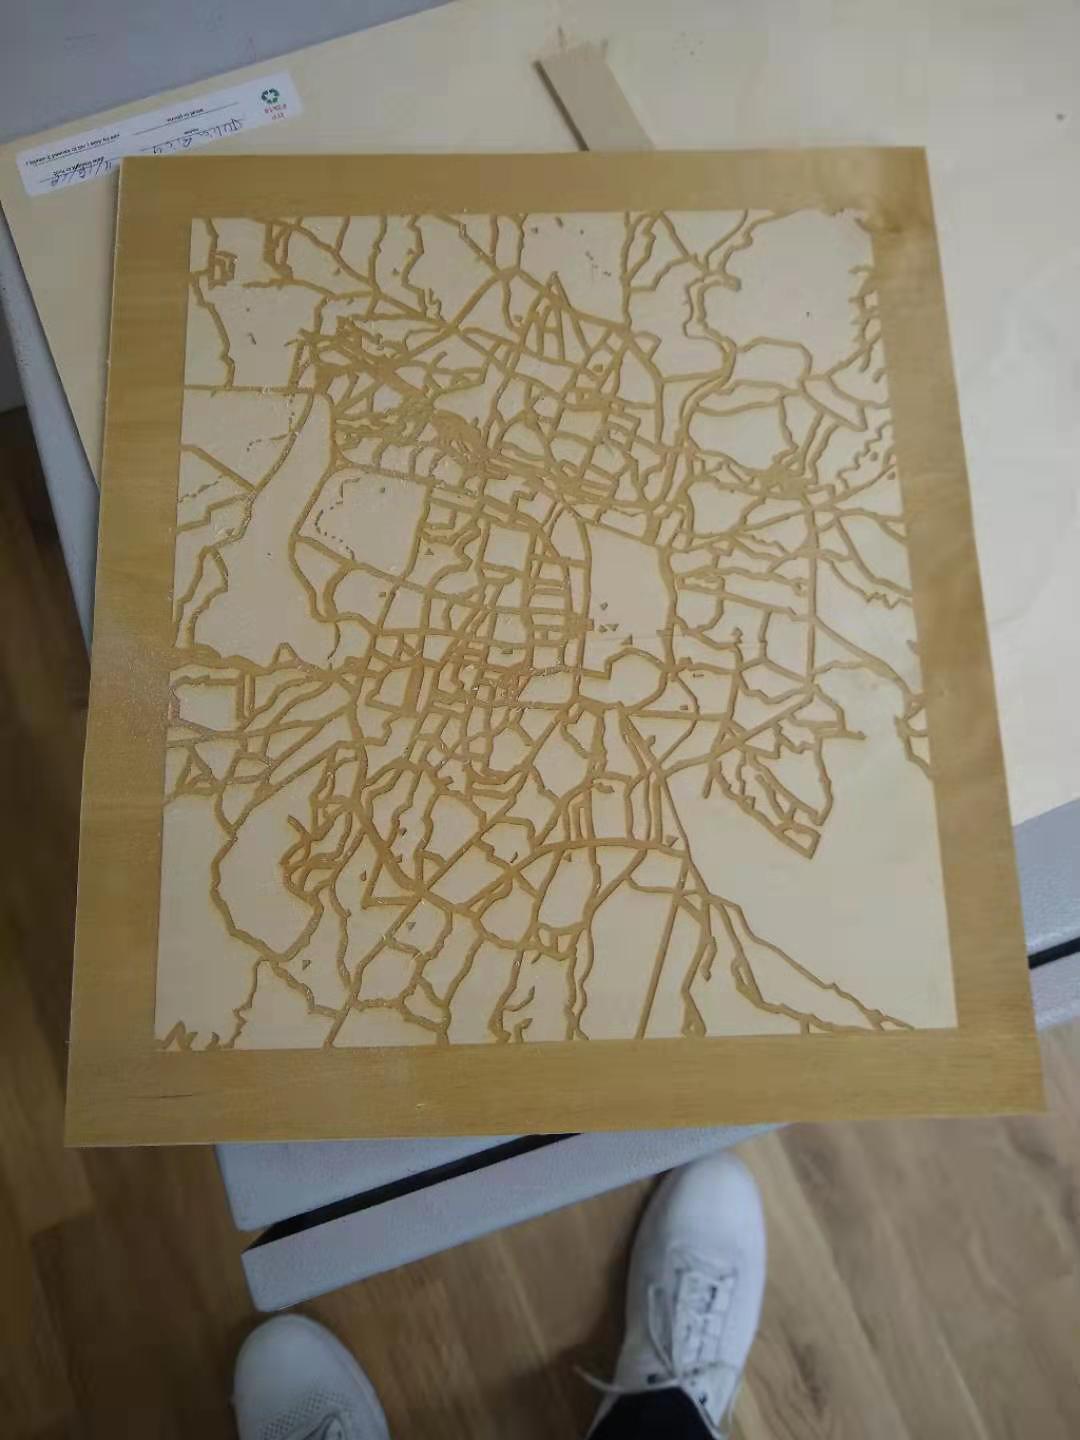 An engraved city map.